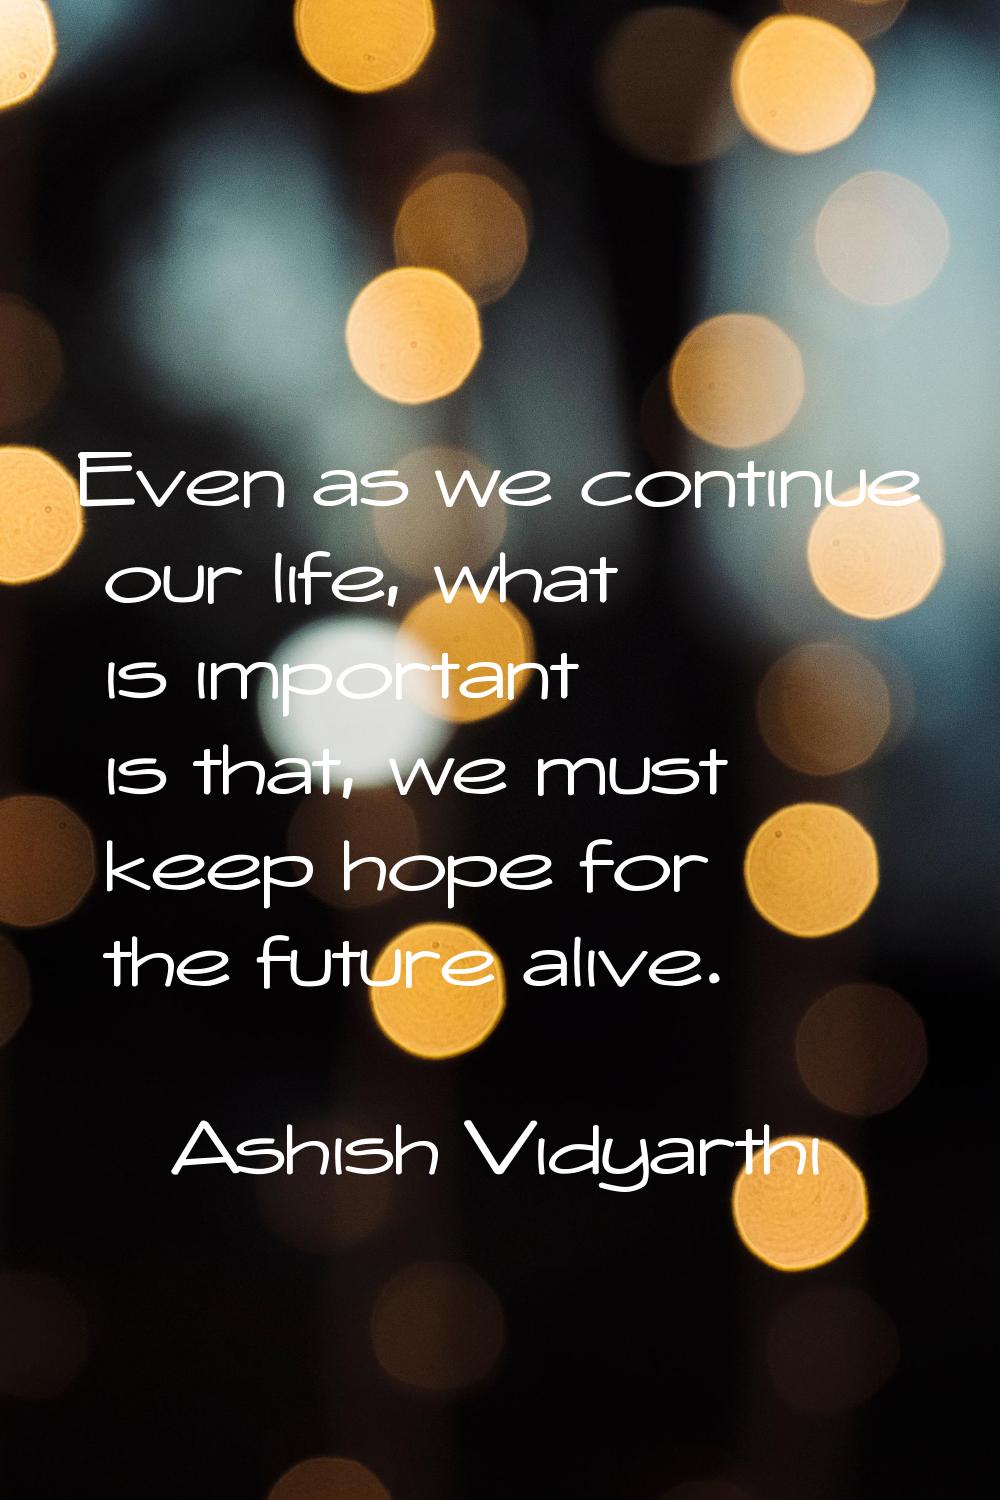 Even as we continue our life, what is important is that, we must keep hope for the future alive.